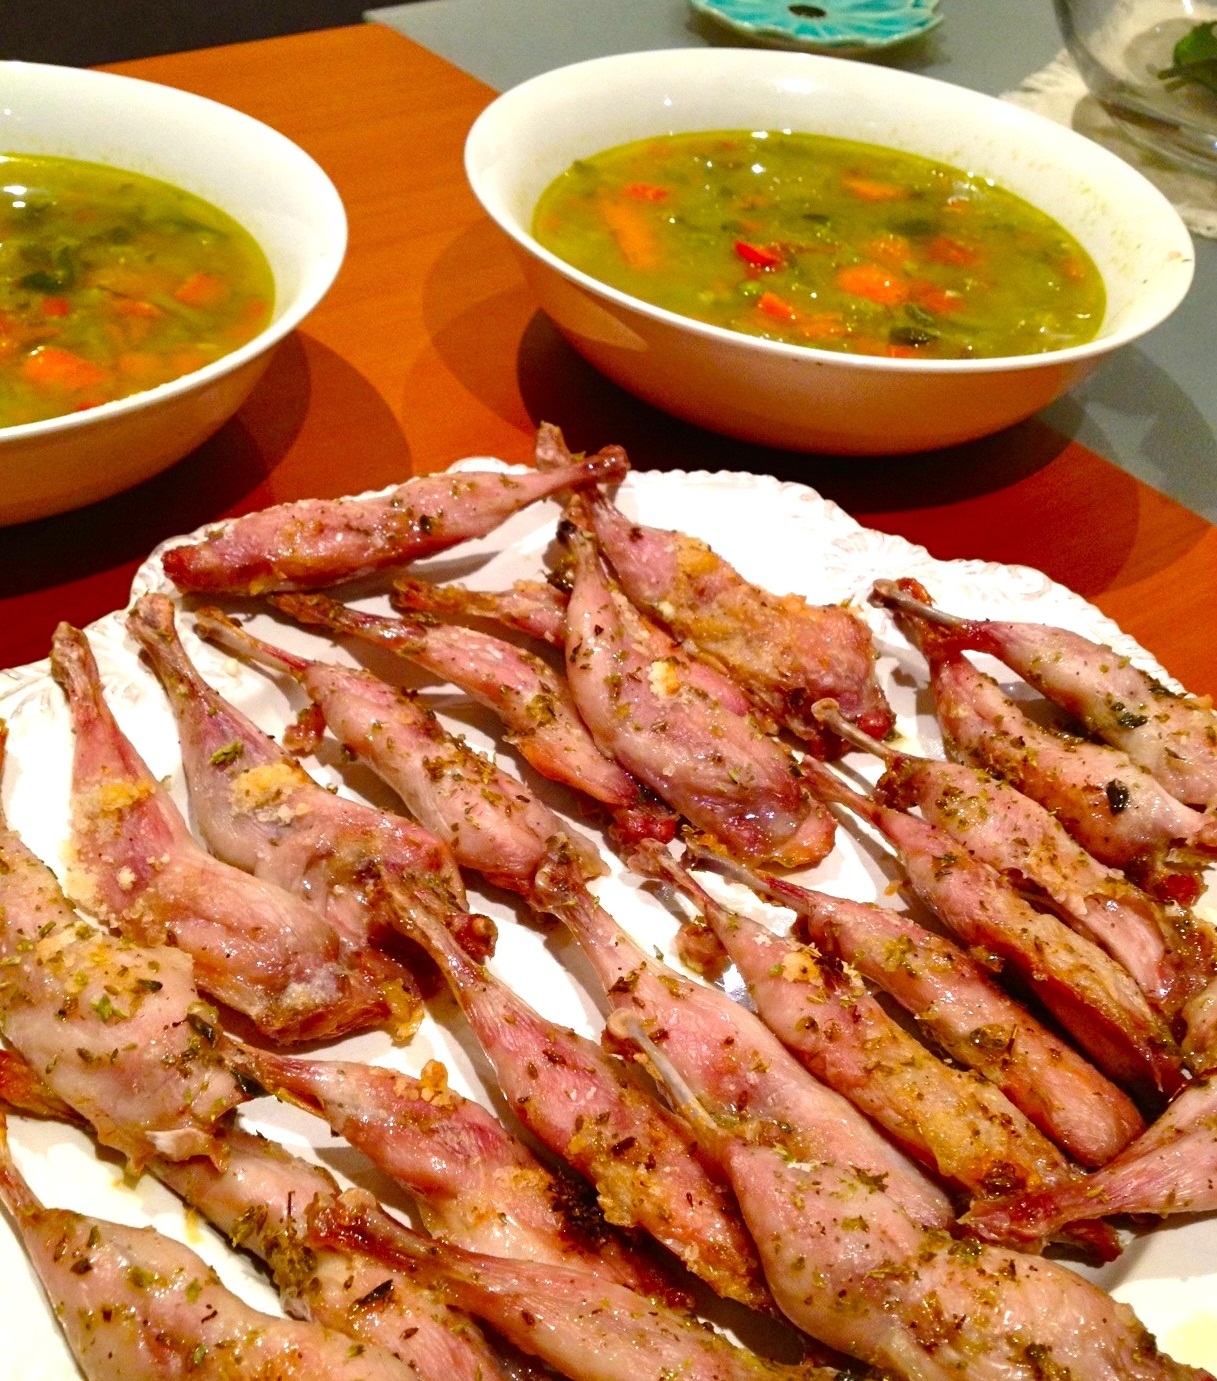 Quail Legs and Basil Infused Minestrone Soup